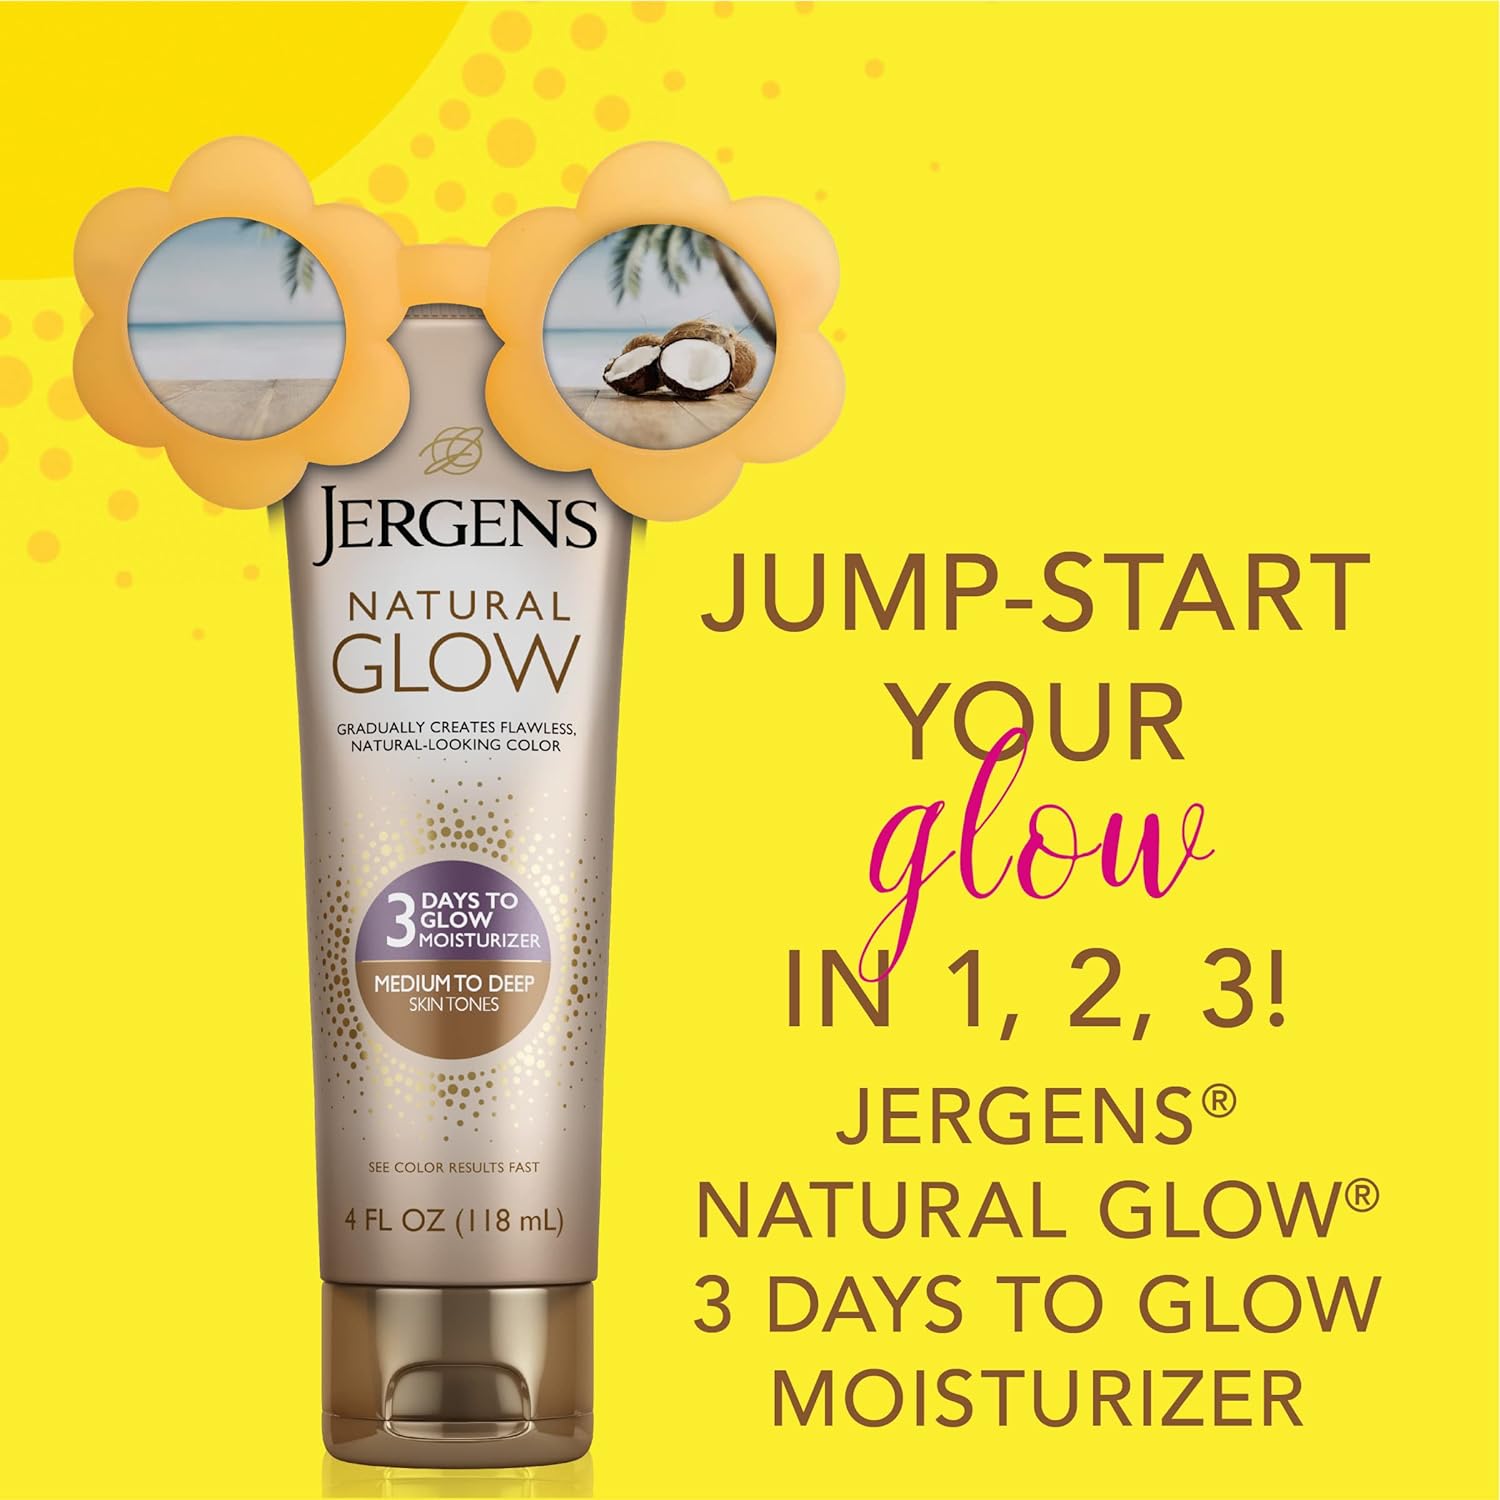 Jergens Natural Glow 3-Day Self Tanner Lotion, Sunless Tanner for Medium to Deep Skin Tone, Sunless Tanning Daily Moisturizer, for Streak-free Color, 4 Ounce, Packaging may vary